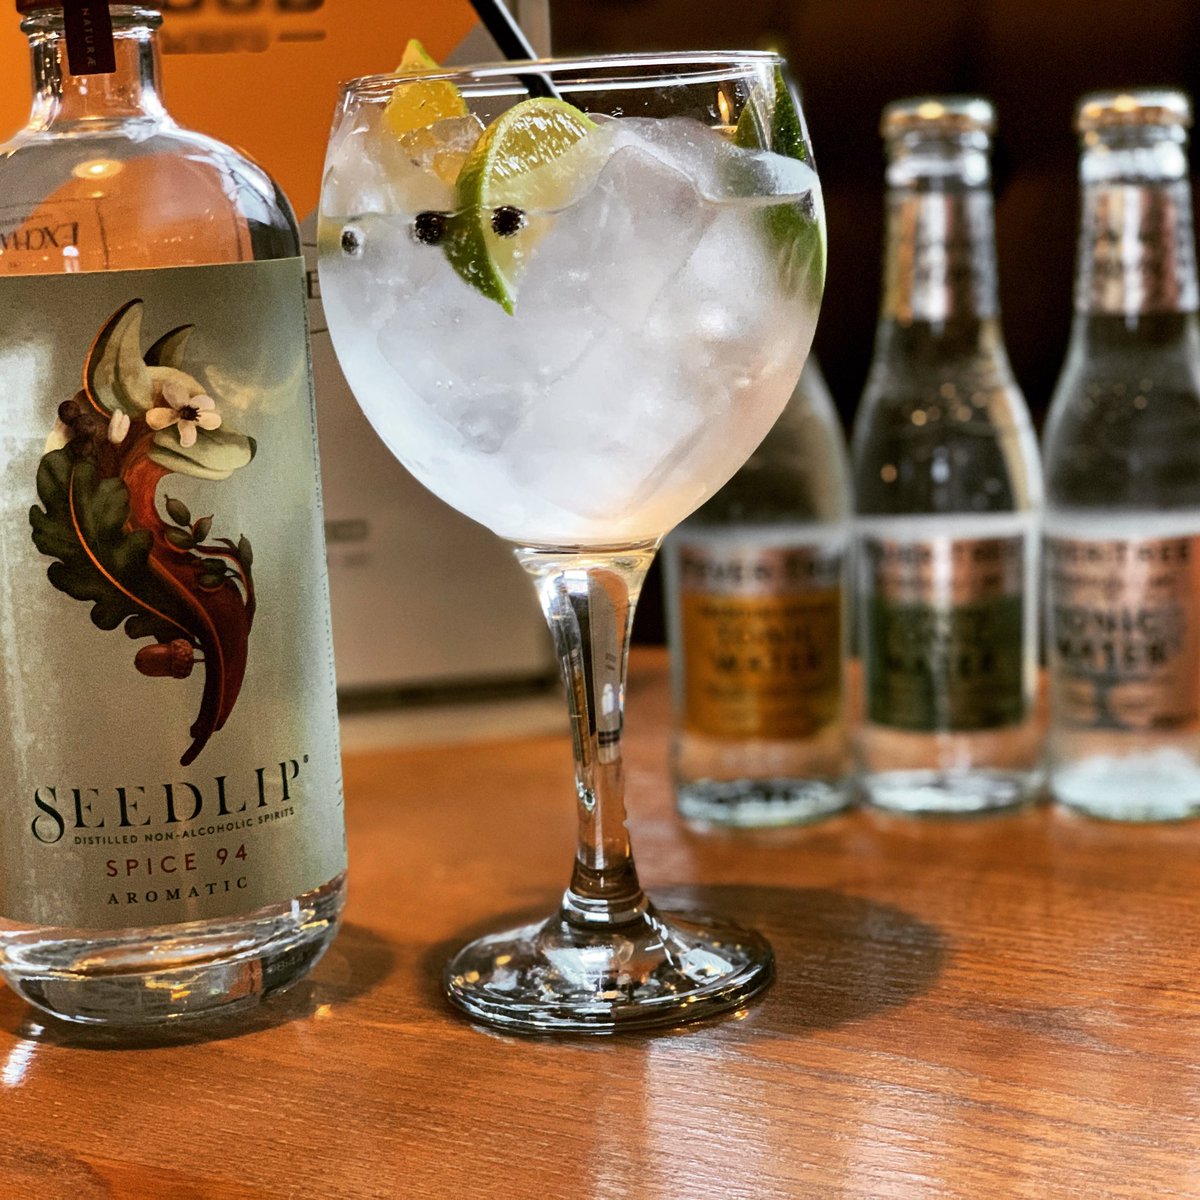 Due to our current license situation we are fully embracing STOPTOBER 🚫🍺 We will be offering bottomless soft drinks with meals til next Friday Come check out our alcohol free range including Seedlip Spice and Fever Tree tonics 🍹 #stoptober #alcoholfree #seedlip #fevertree